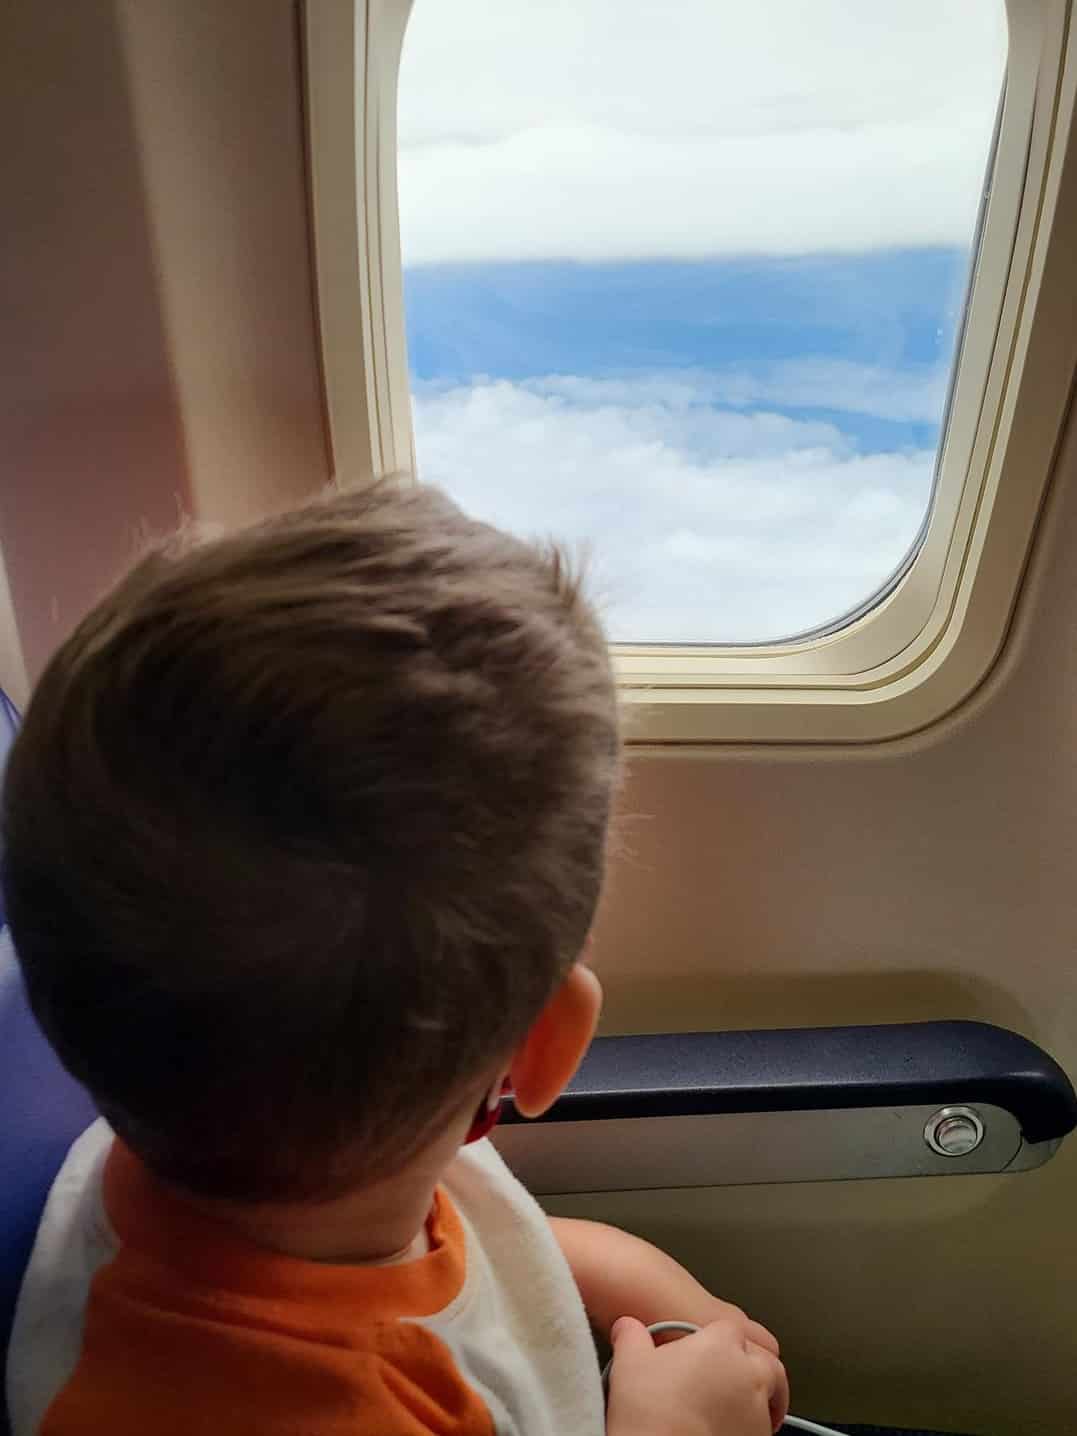 Kid looking out the window of an airplane - flying on a biofueled airplane as an eco-friendly travel tips for families